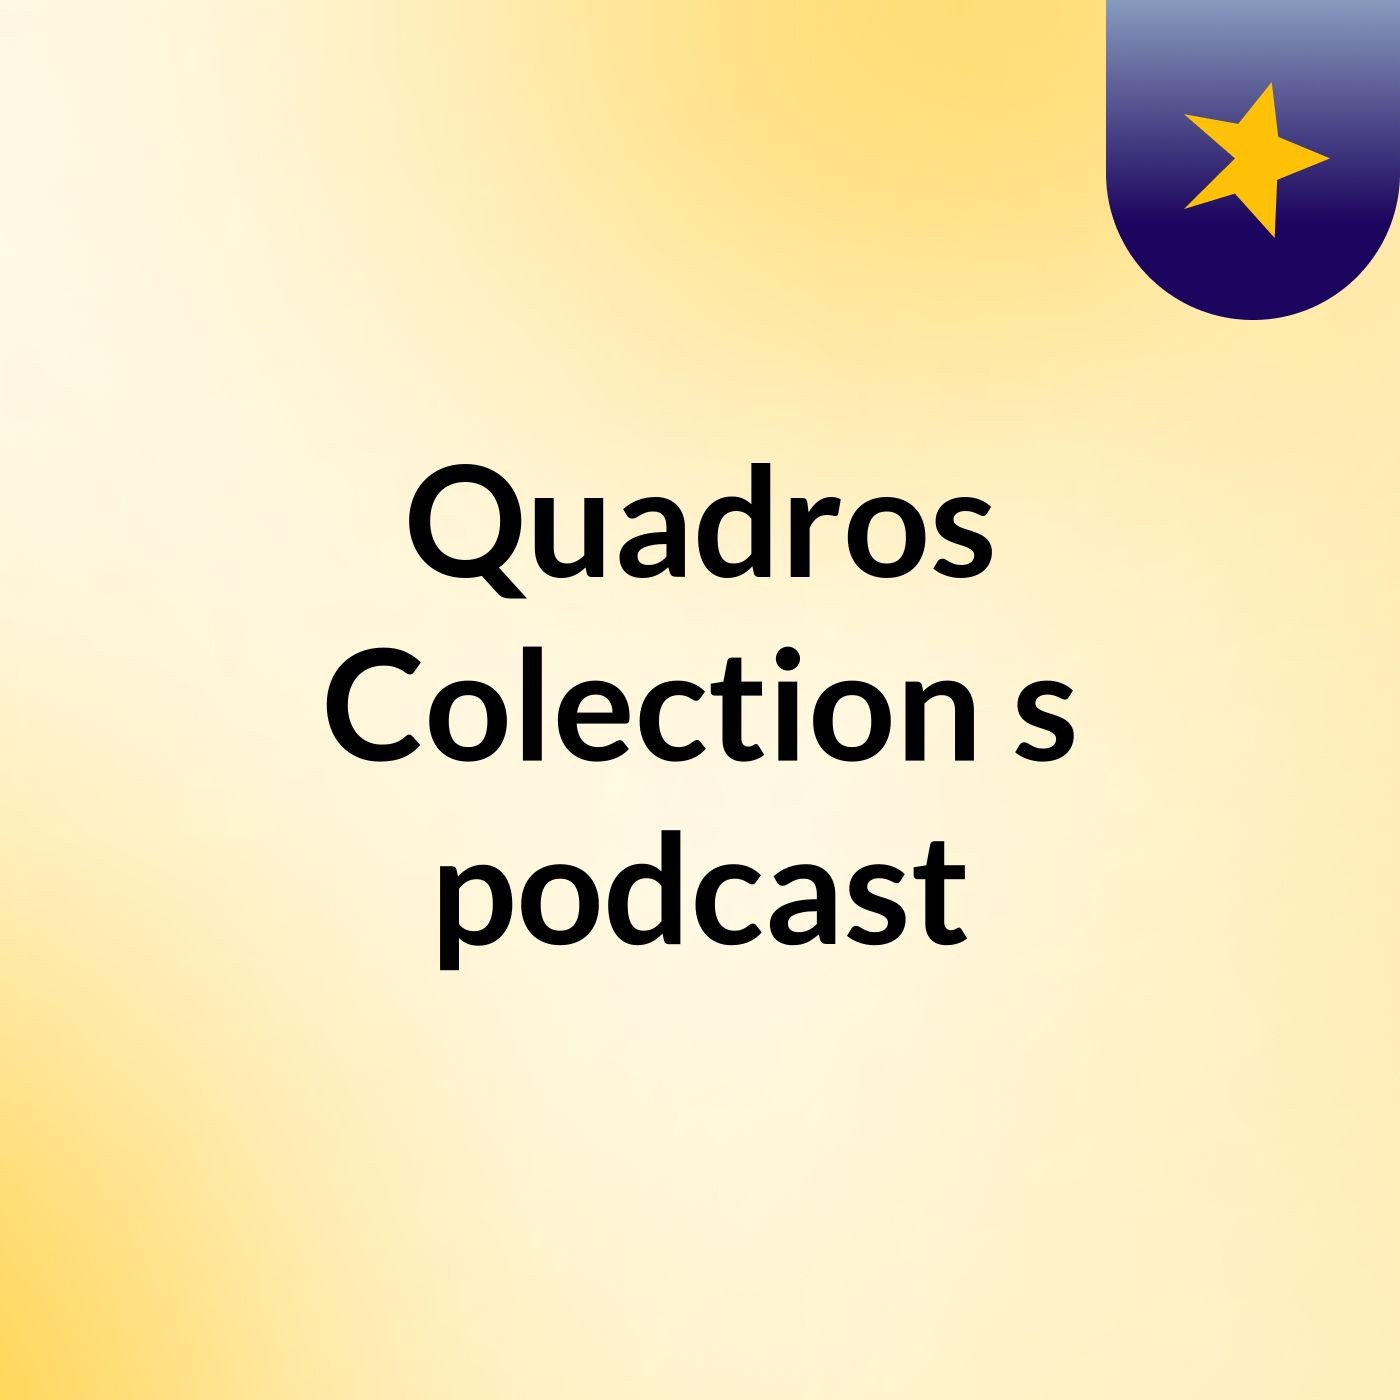 Quadros Colection's podcast